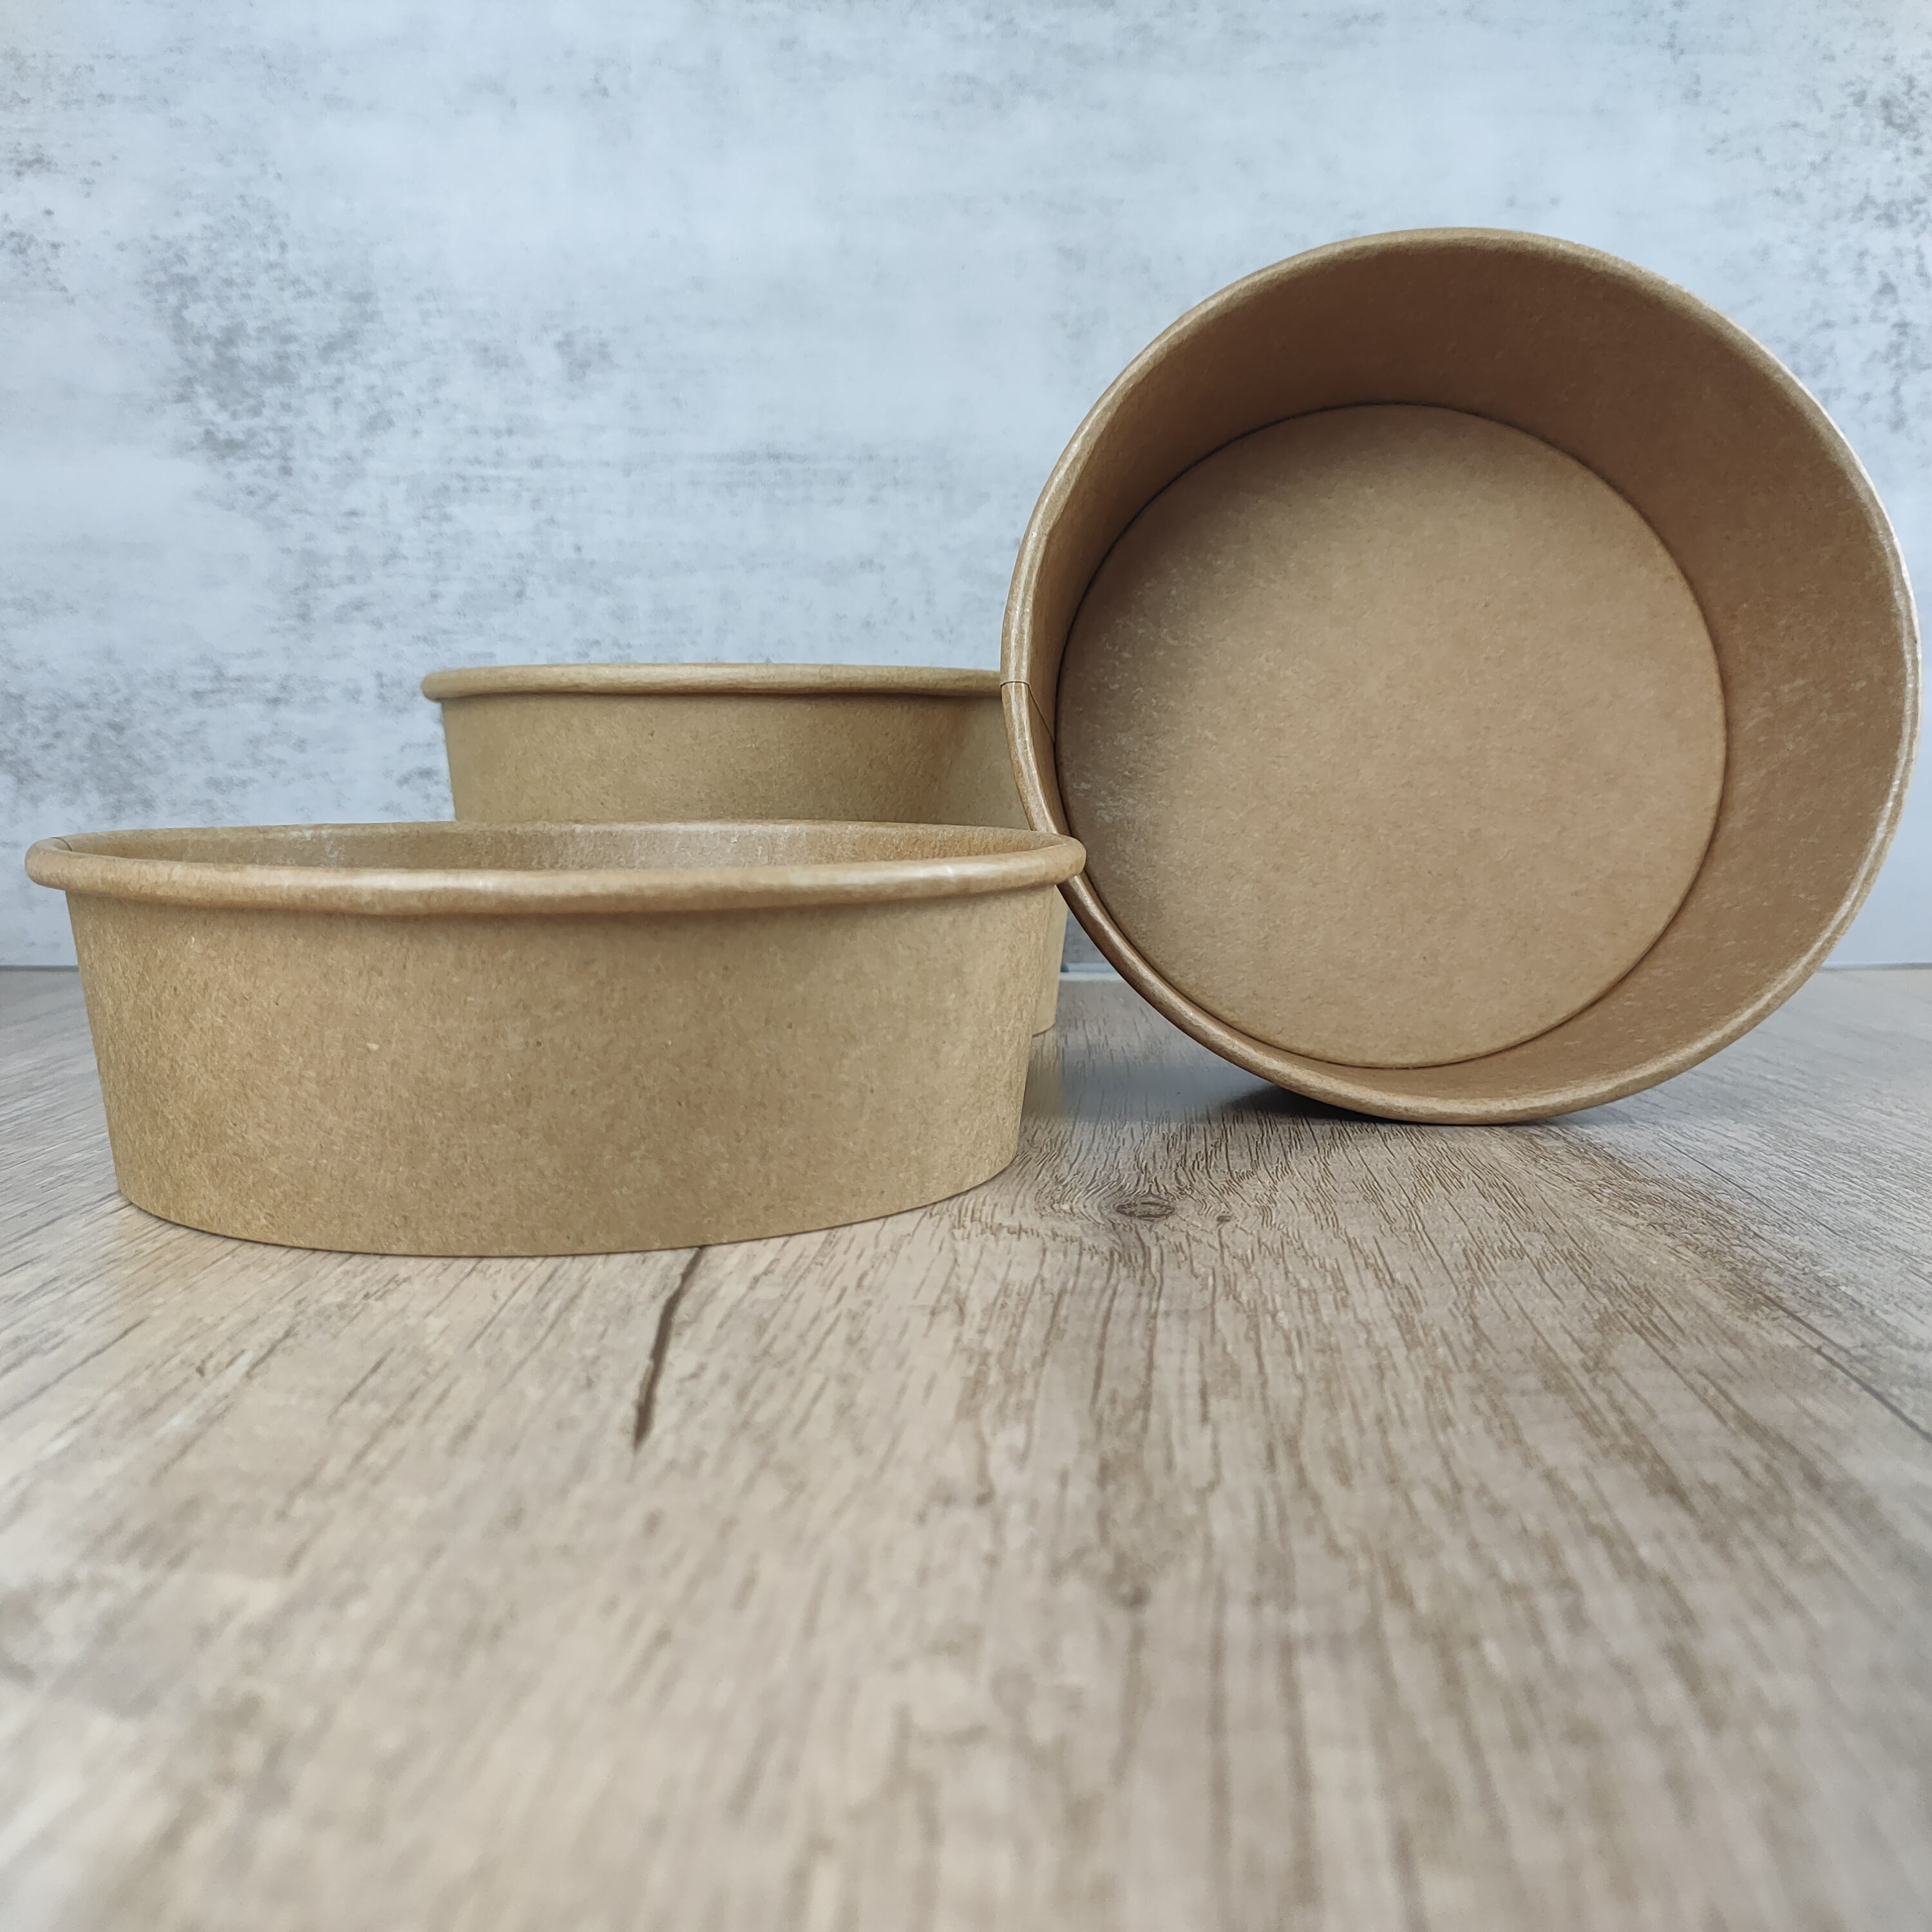 1500ml/52oz Leakproof Kraft Paper Bowl with Lids Stack Safe, Durable Cardboard Meal Prep Food Container, Hot Cold To Go Resta 